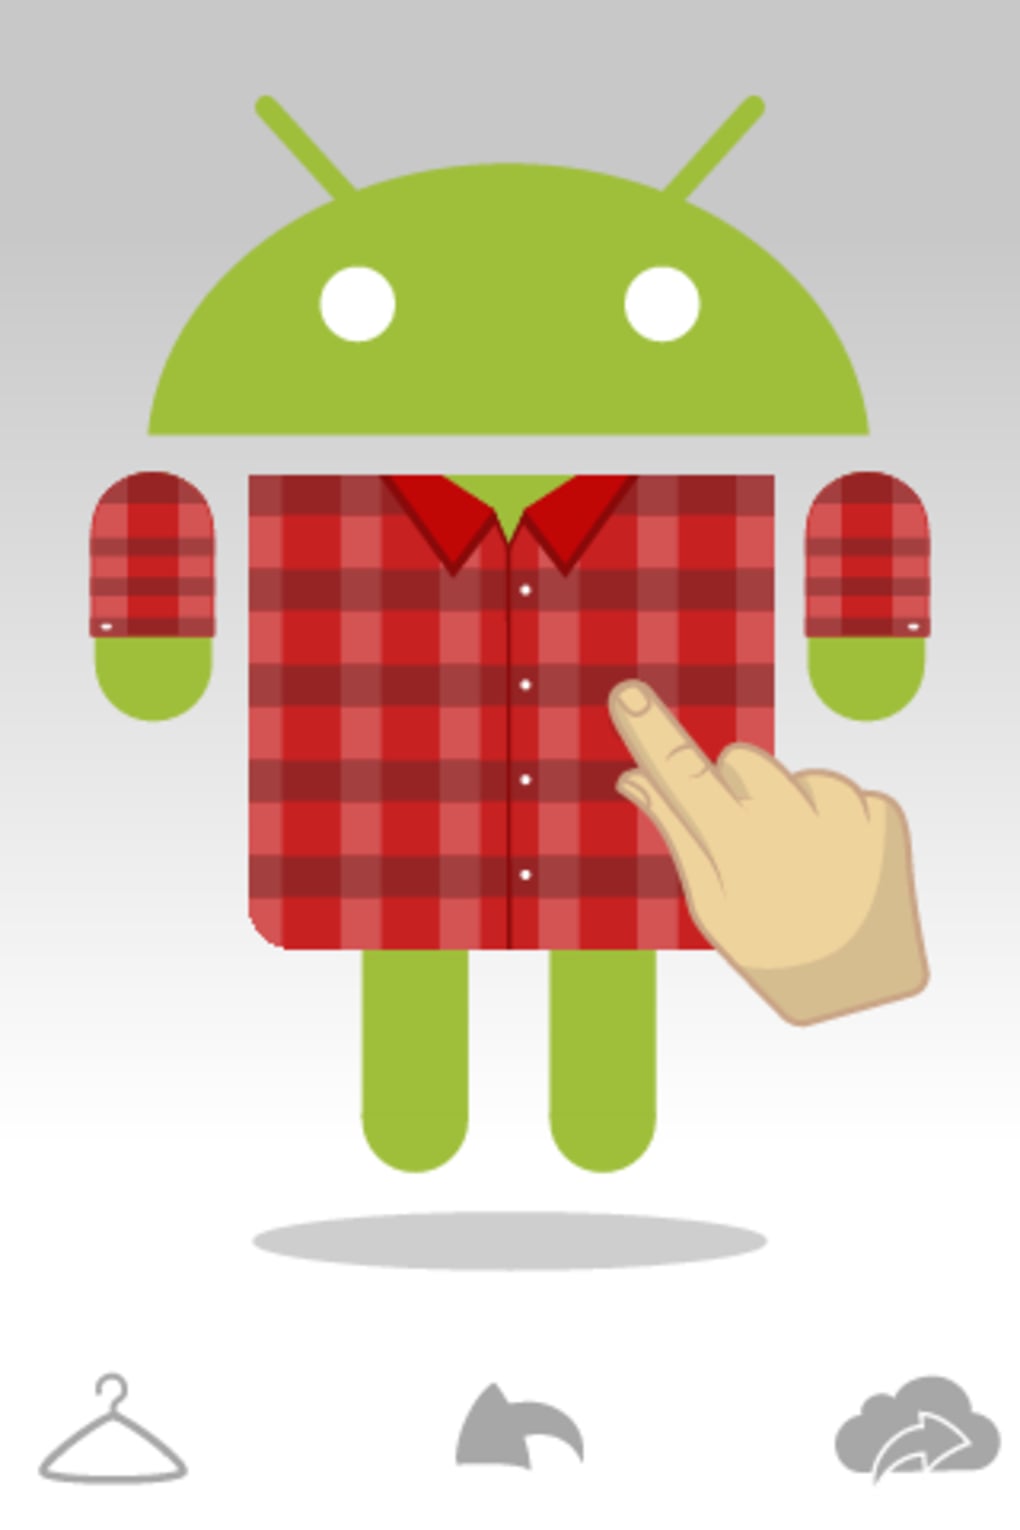 Androidify Android Download